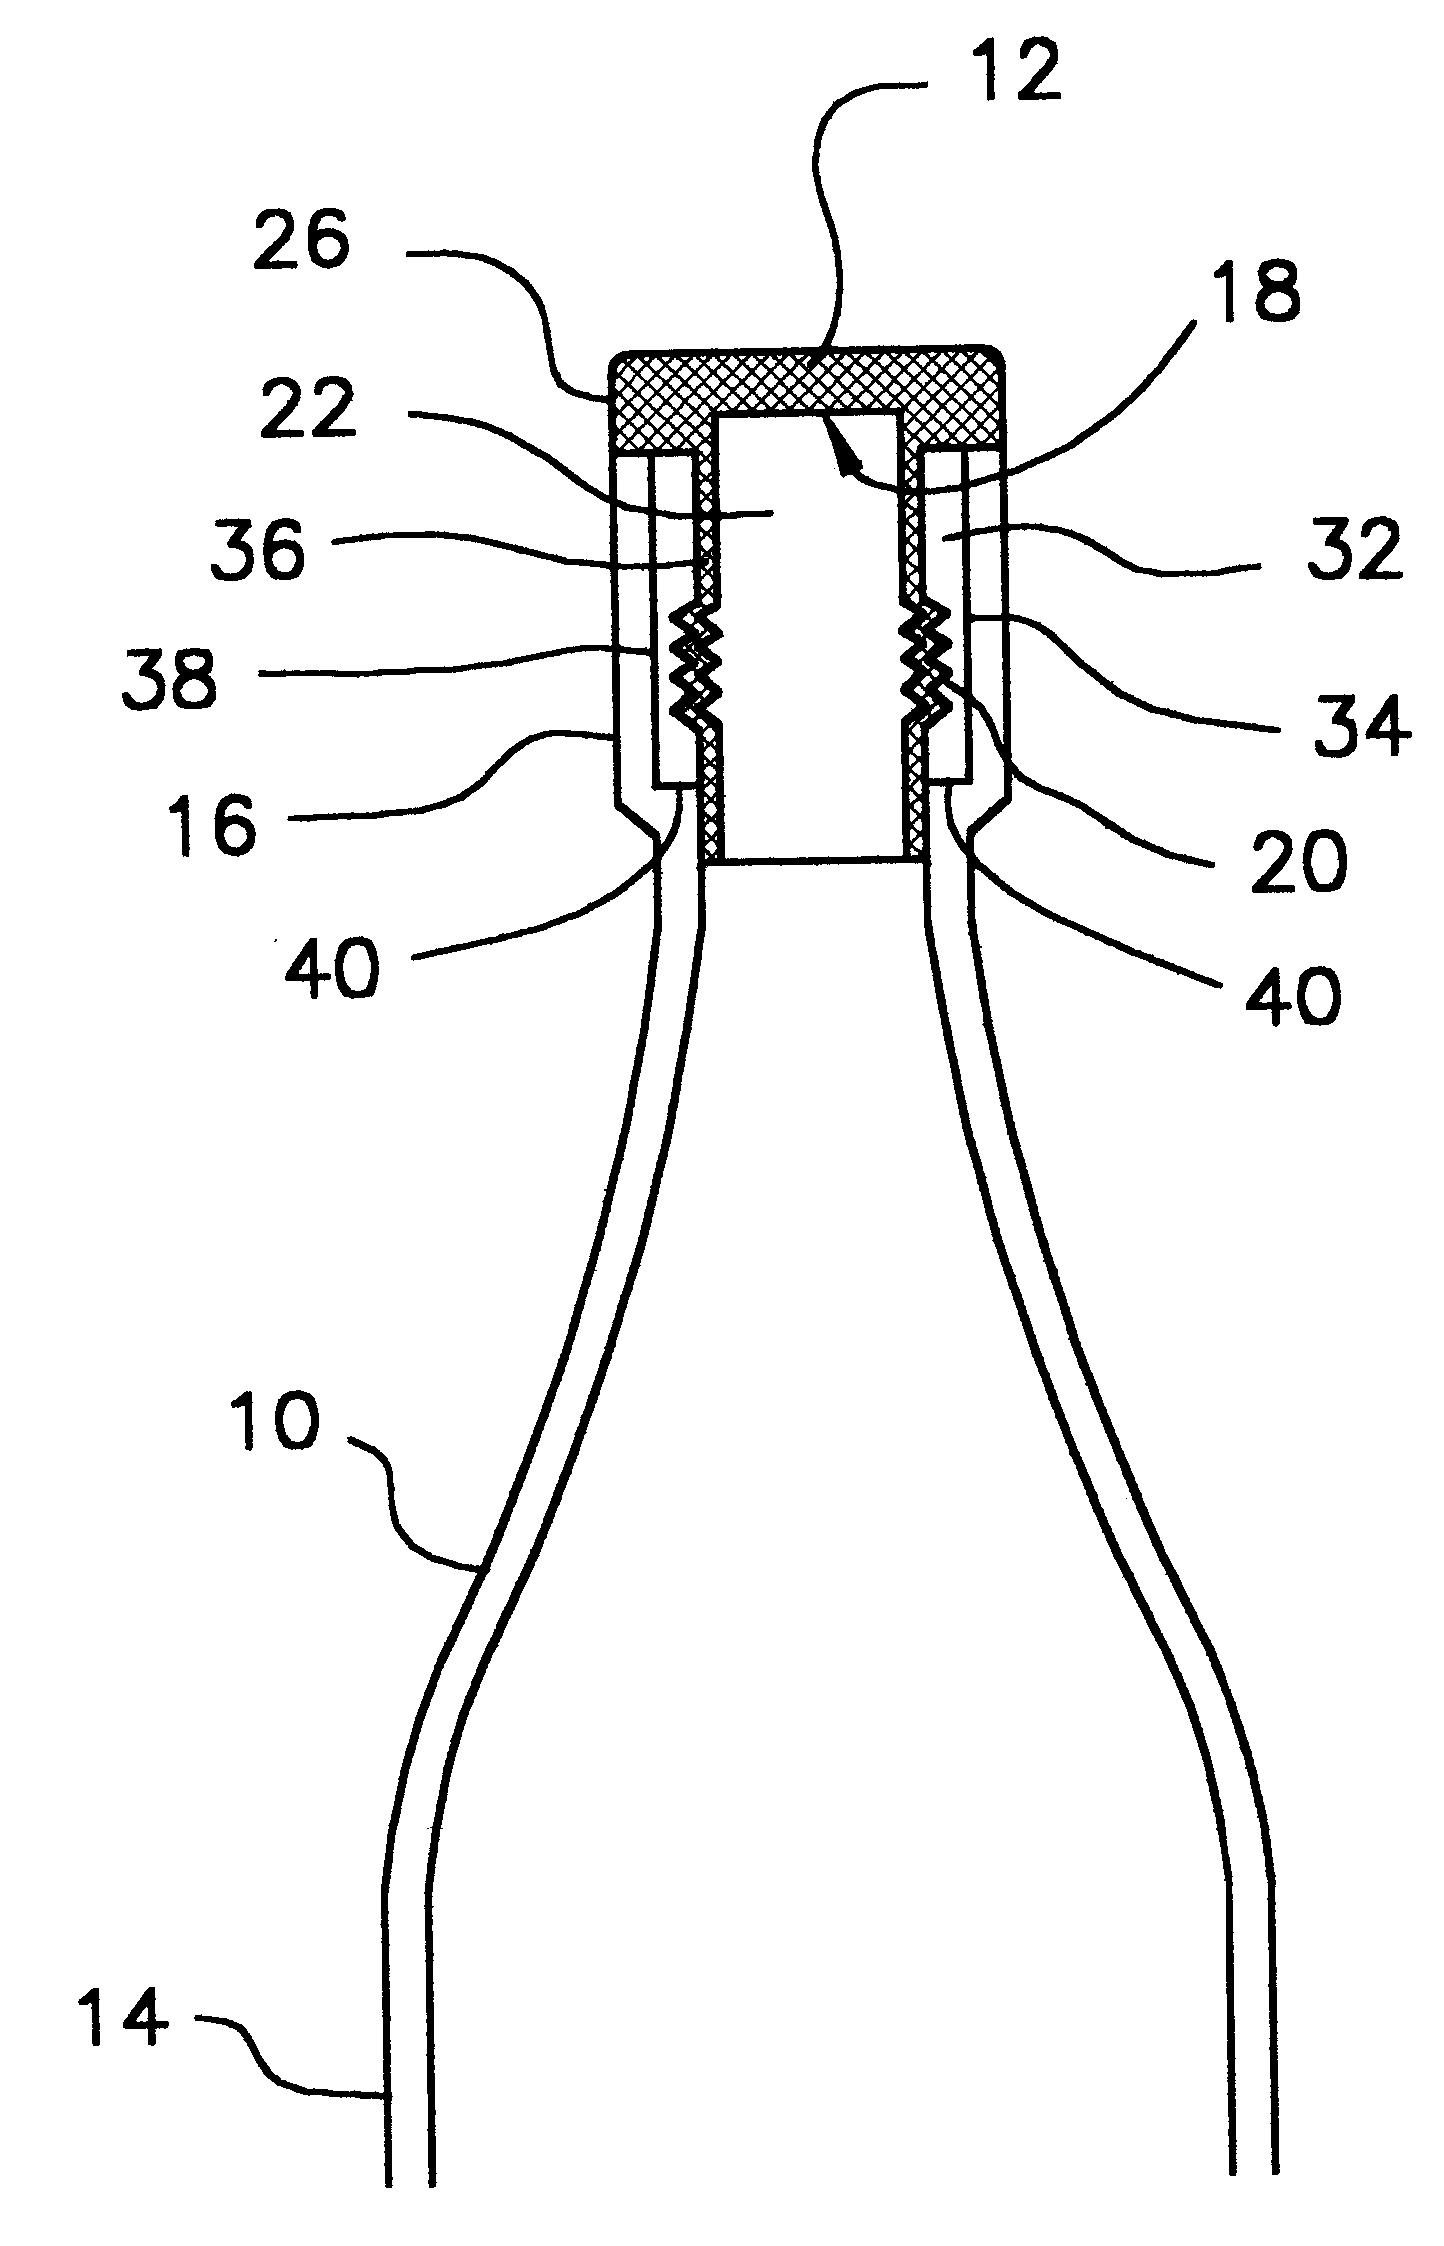 Flange screw closure and bottle with insert having threads